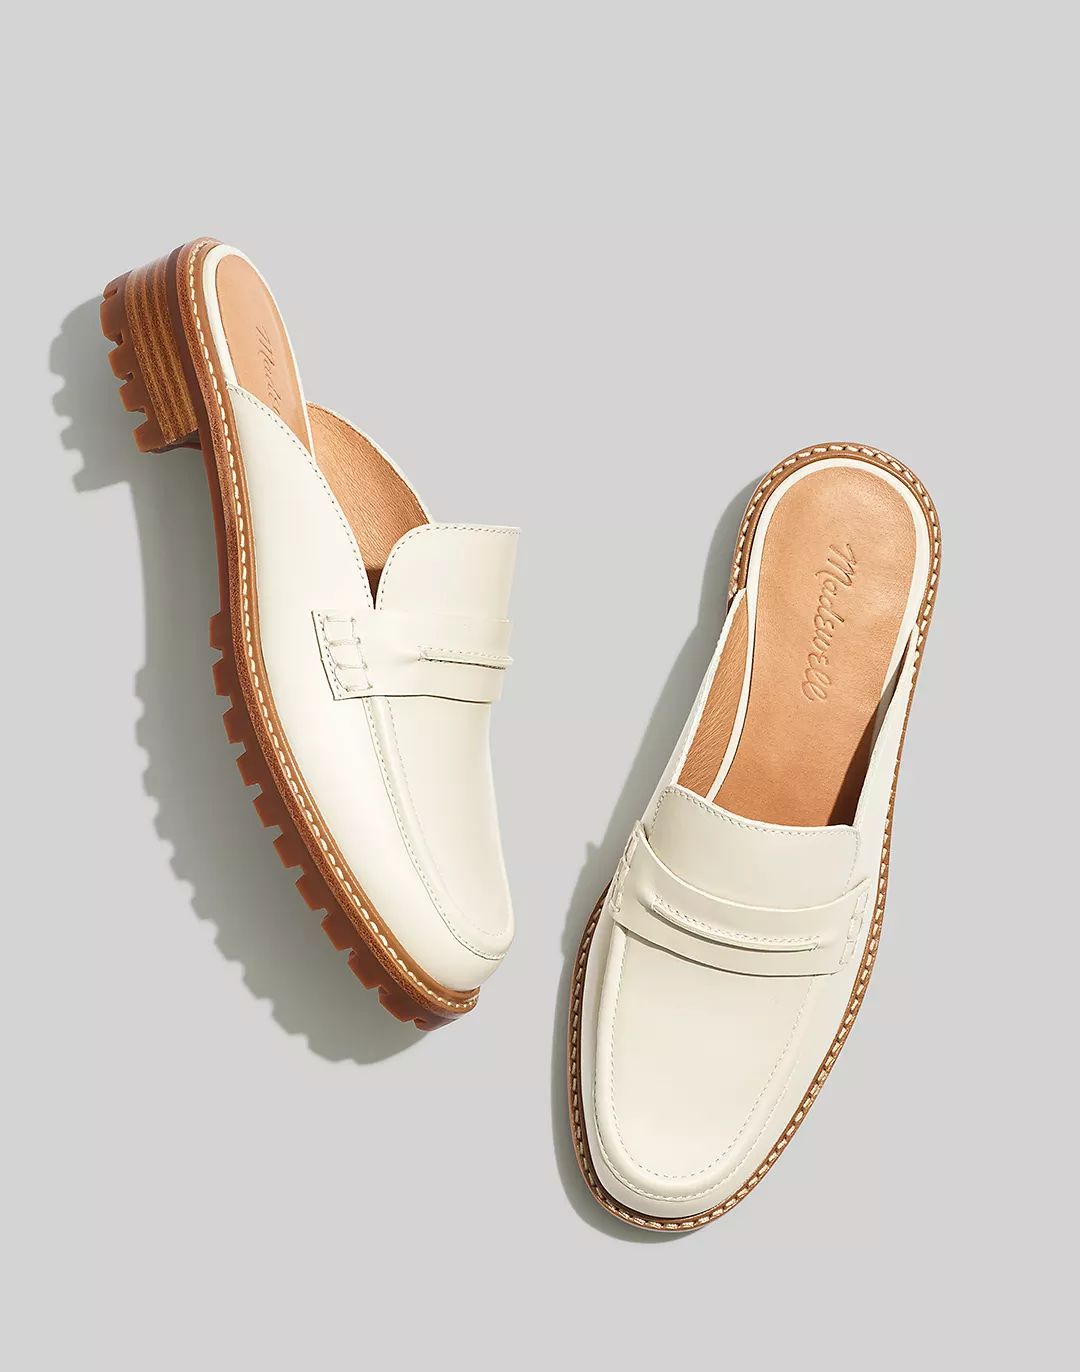 The Corinne Lugsole Loafer Mule | Madewell